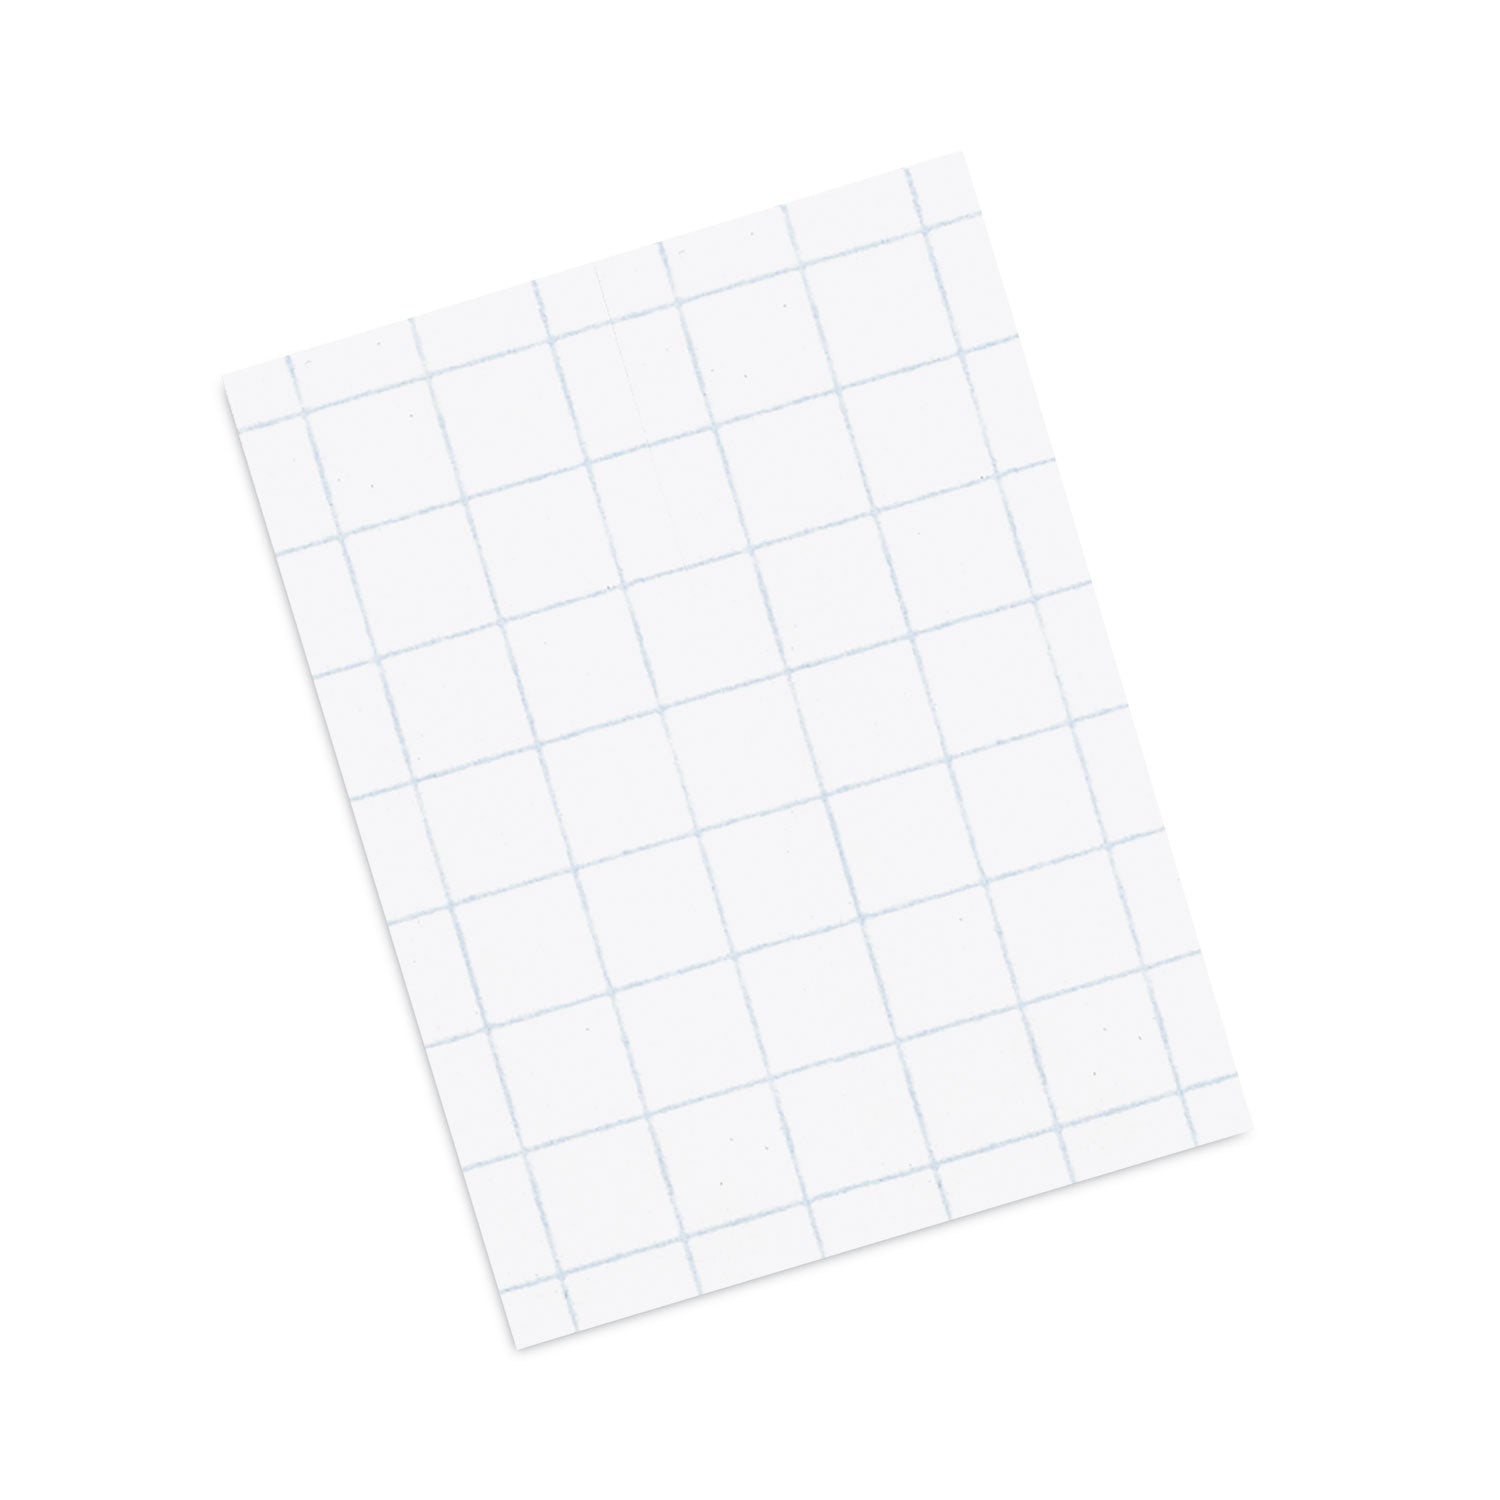 Composition Paper, 8.5 x 11, Quadrille: 4 sq/in, 500/Pack - 